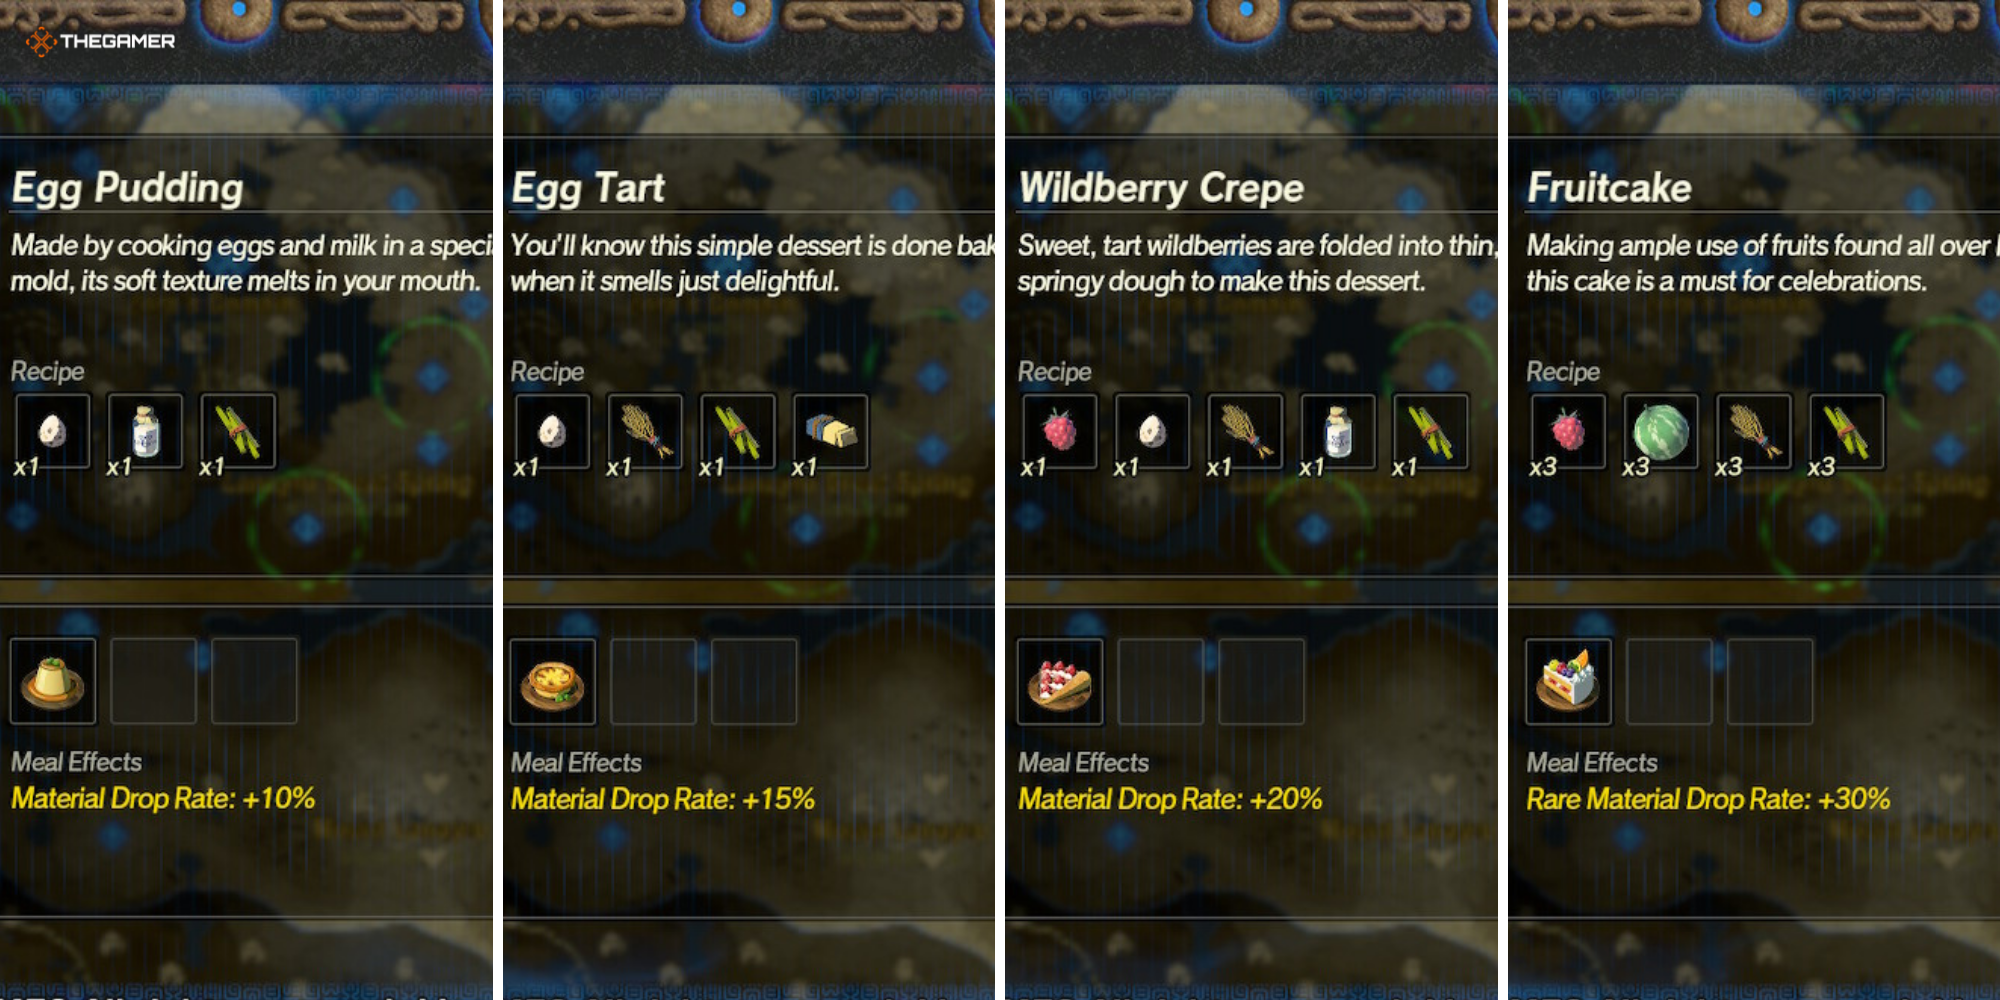 Age of Calamity, Recipes to Cook Before Battle - (left to right) Egg Pudding, Egg Tart, Wildberry Crepe, Fruitcake